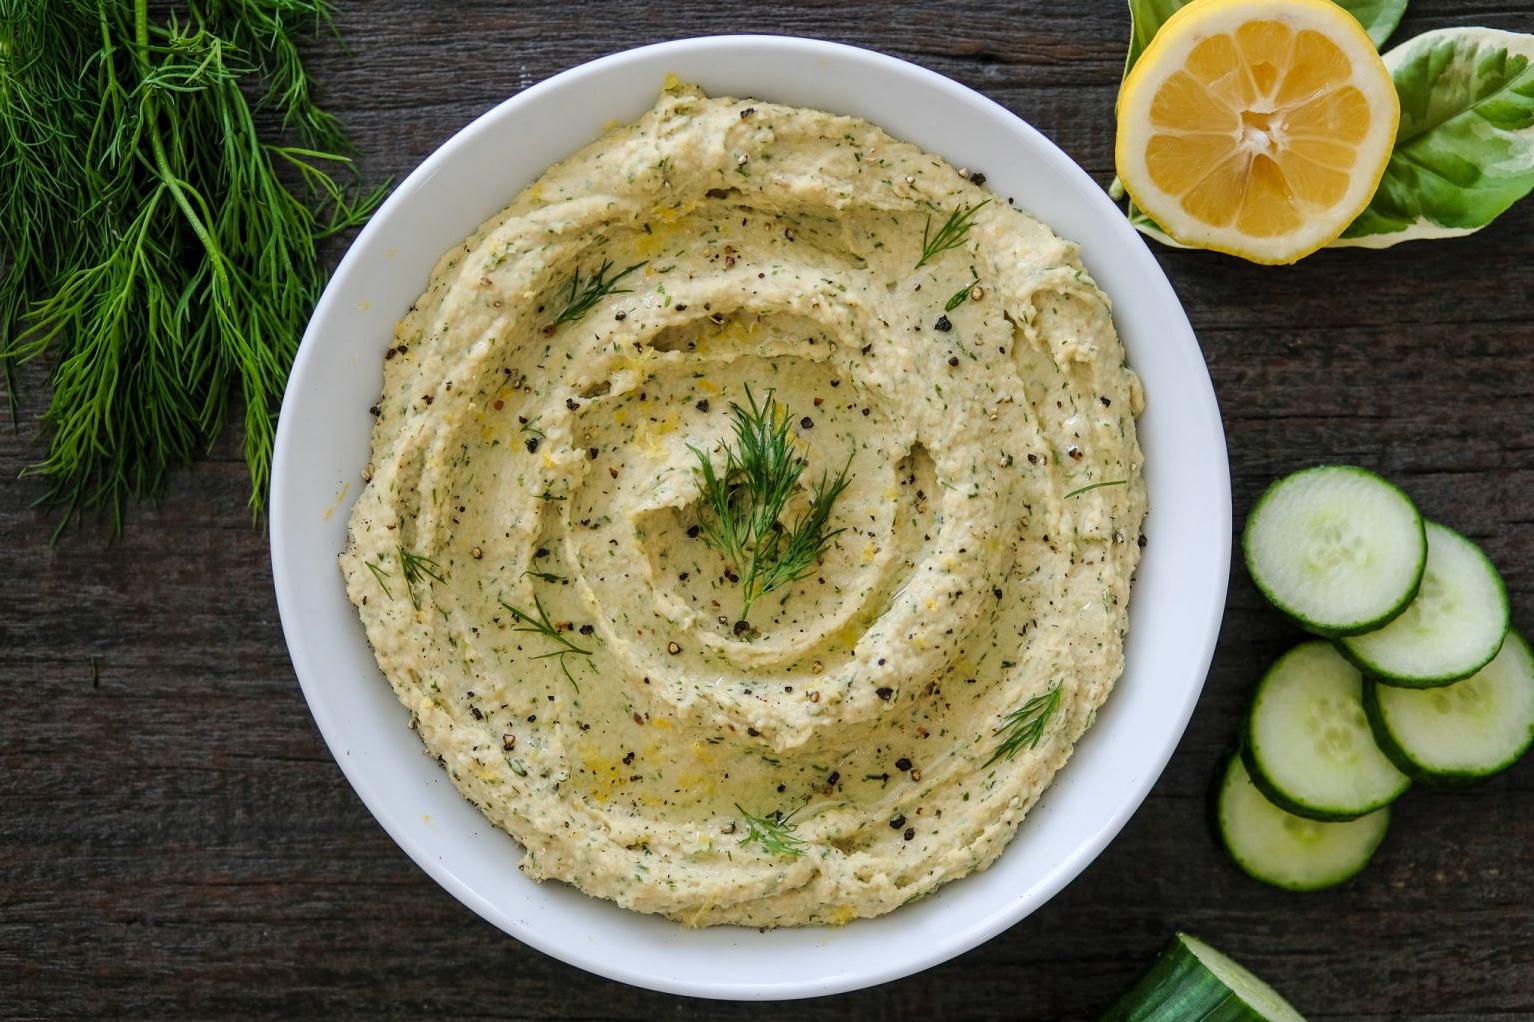  Creamy hummus with a twist of dill.